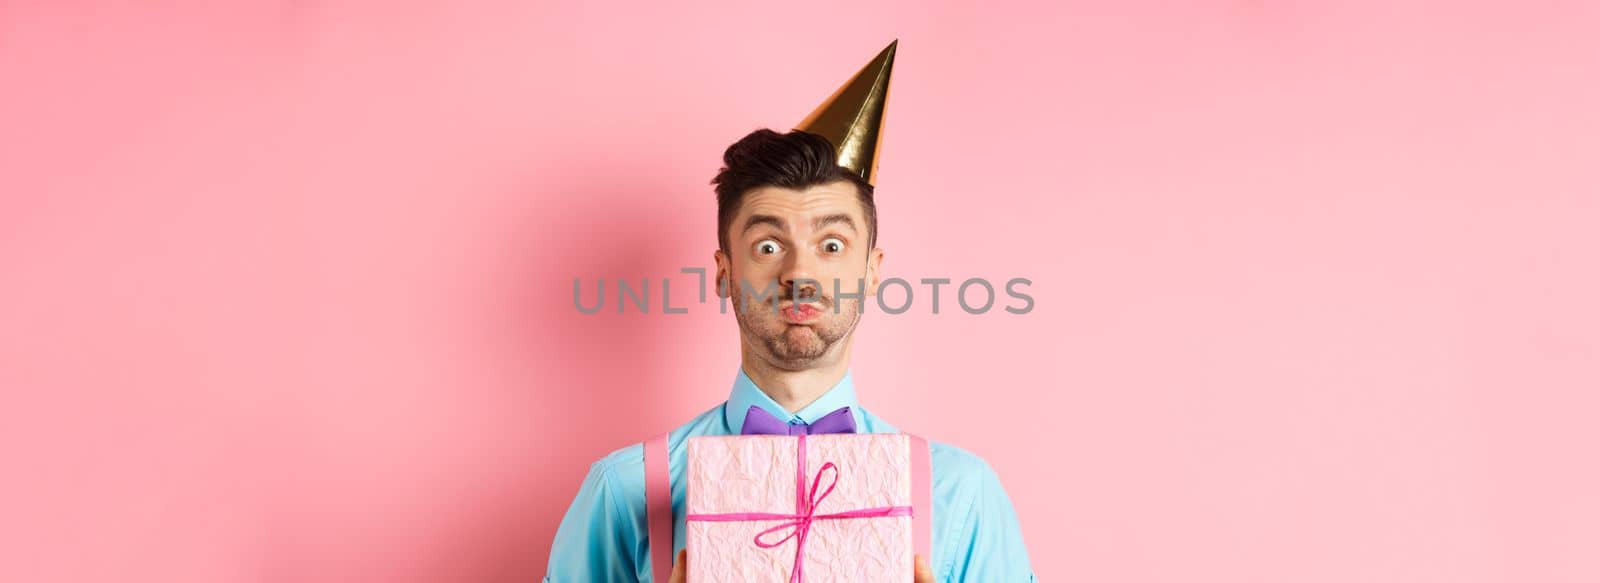 Holidays and celebration concept. Funny guy staring at camera surprised, wearing party hat, holding birthday gift and holding breath, pouting at camera, pink background.